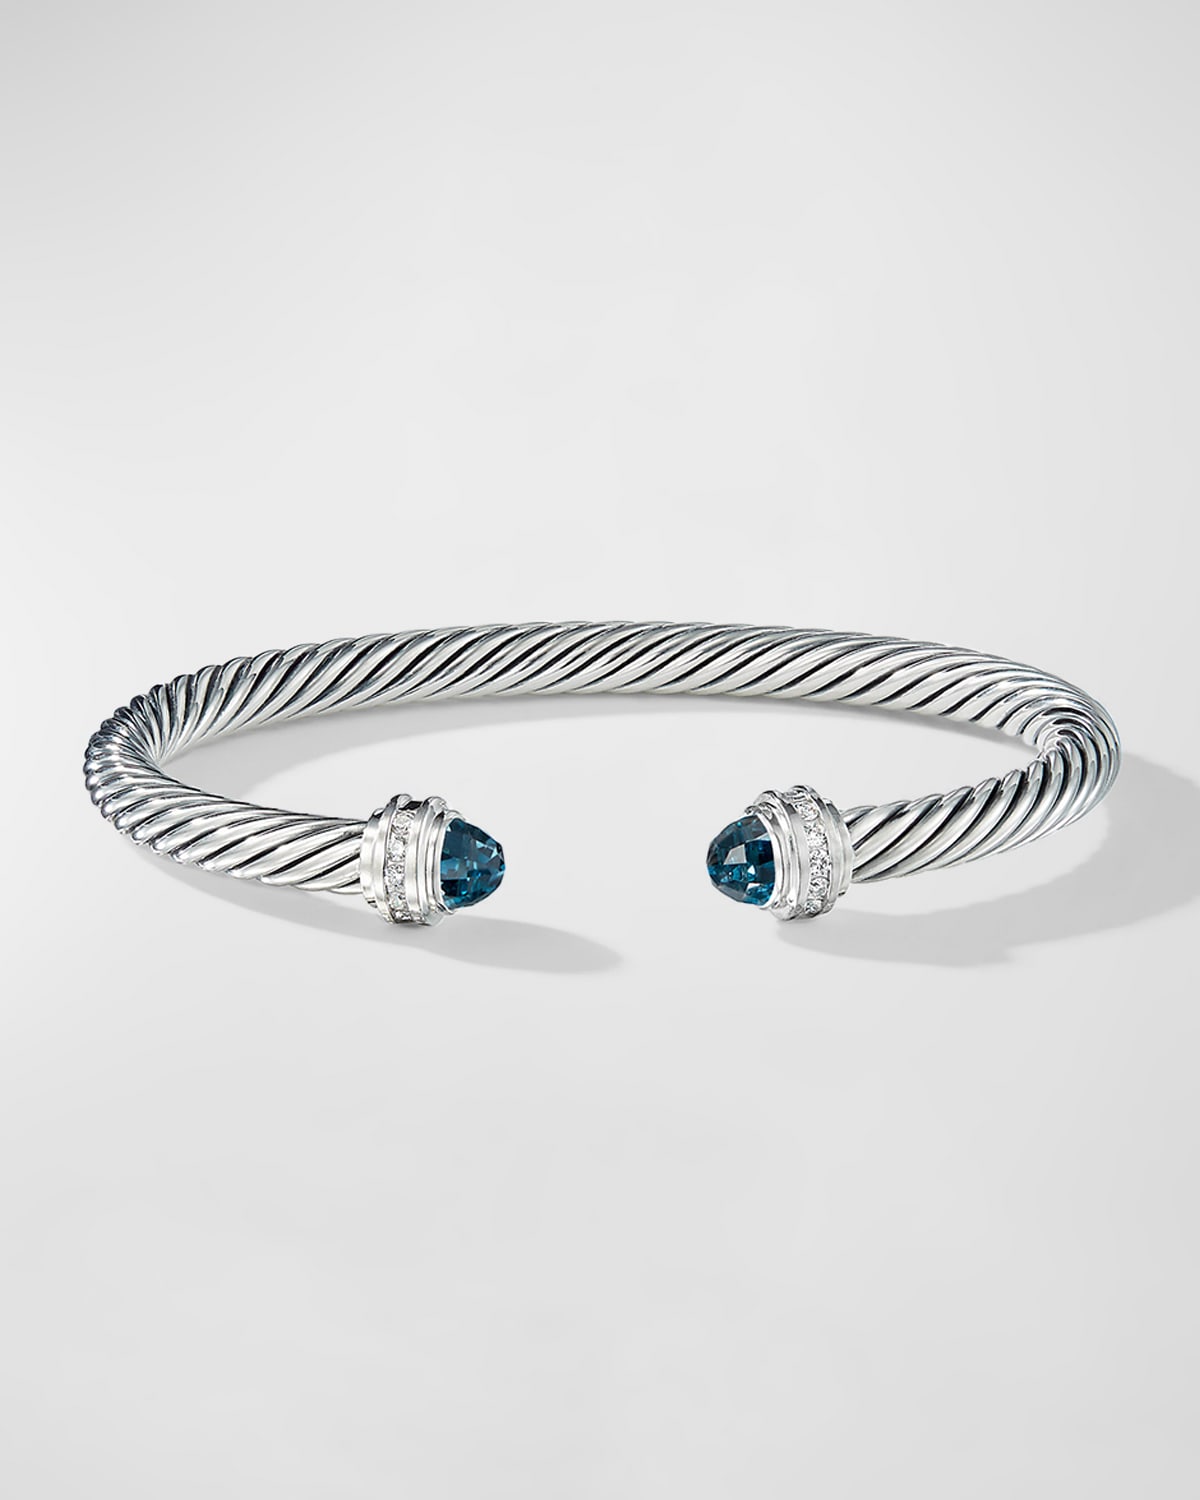 DAVID YURMAN CABLE BRACELET WITH GEMSTONES IN SILVER, 5MM